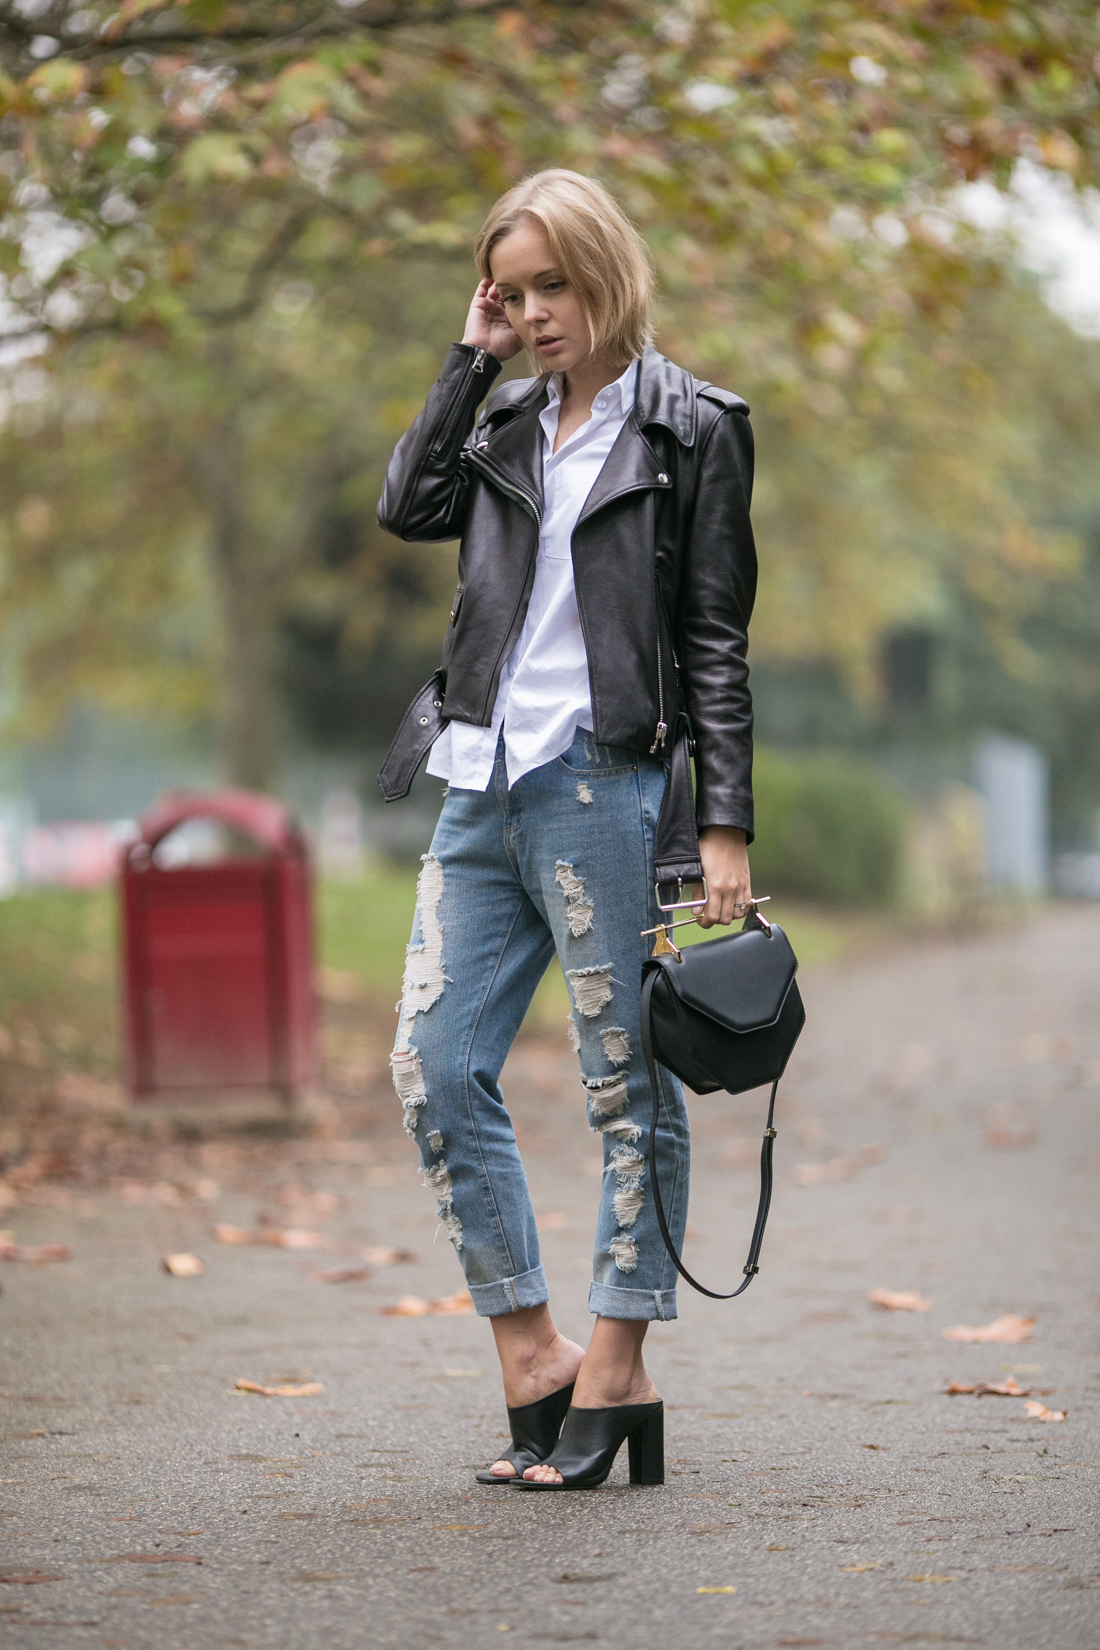 darya kamalova thecablook russian fashion lifestyle blogger in italy outfit spring acne mape leather jacket with boyfriend ripped jeans mules ans m2malletier black bag